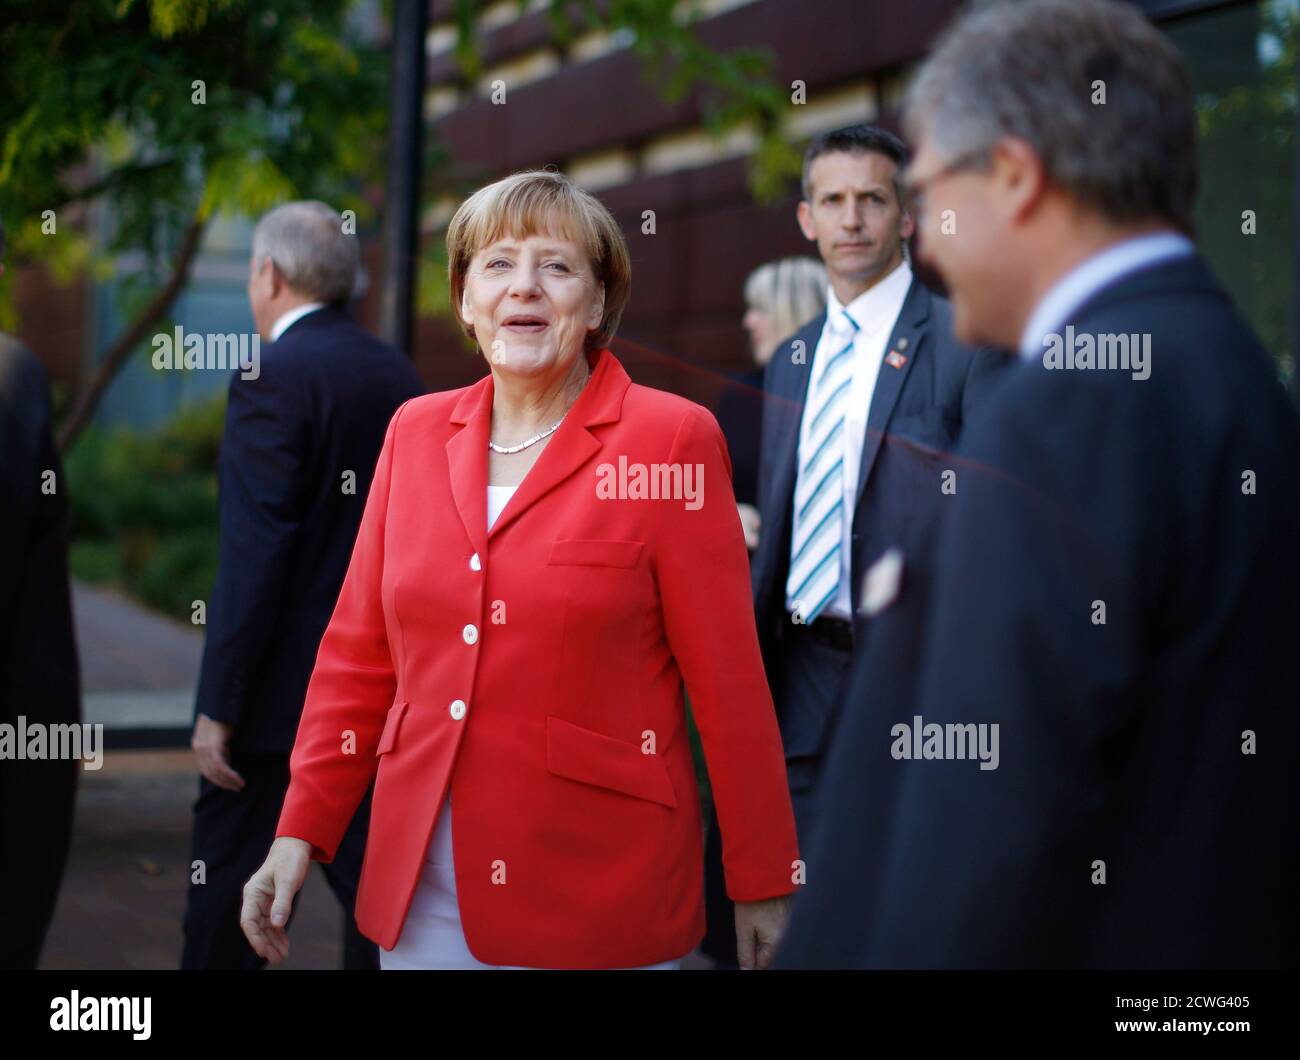 Germany's Chancellor Angela Merkel walks from her visit to the Future Logistics Living Lab in Sydney, November 17, 2014. Merkel is in Sydney following the G20 leaders Summit in Brisbane.     REUTERS/Jason Reed    (AUSTRALIA - Tags: POLITICS SCIENCE TECHNOLOGY) Stock Photo